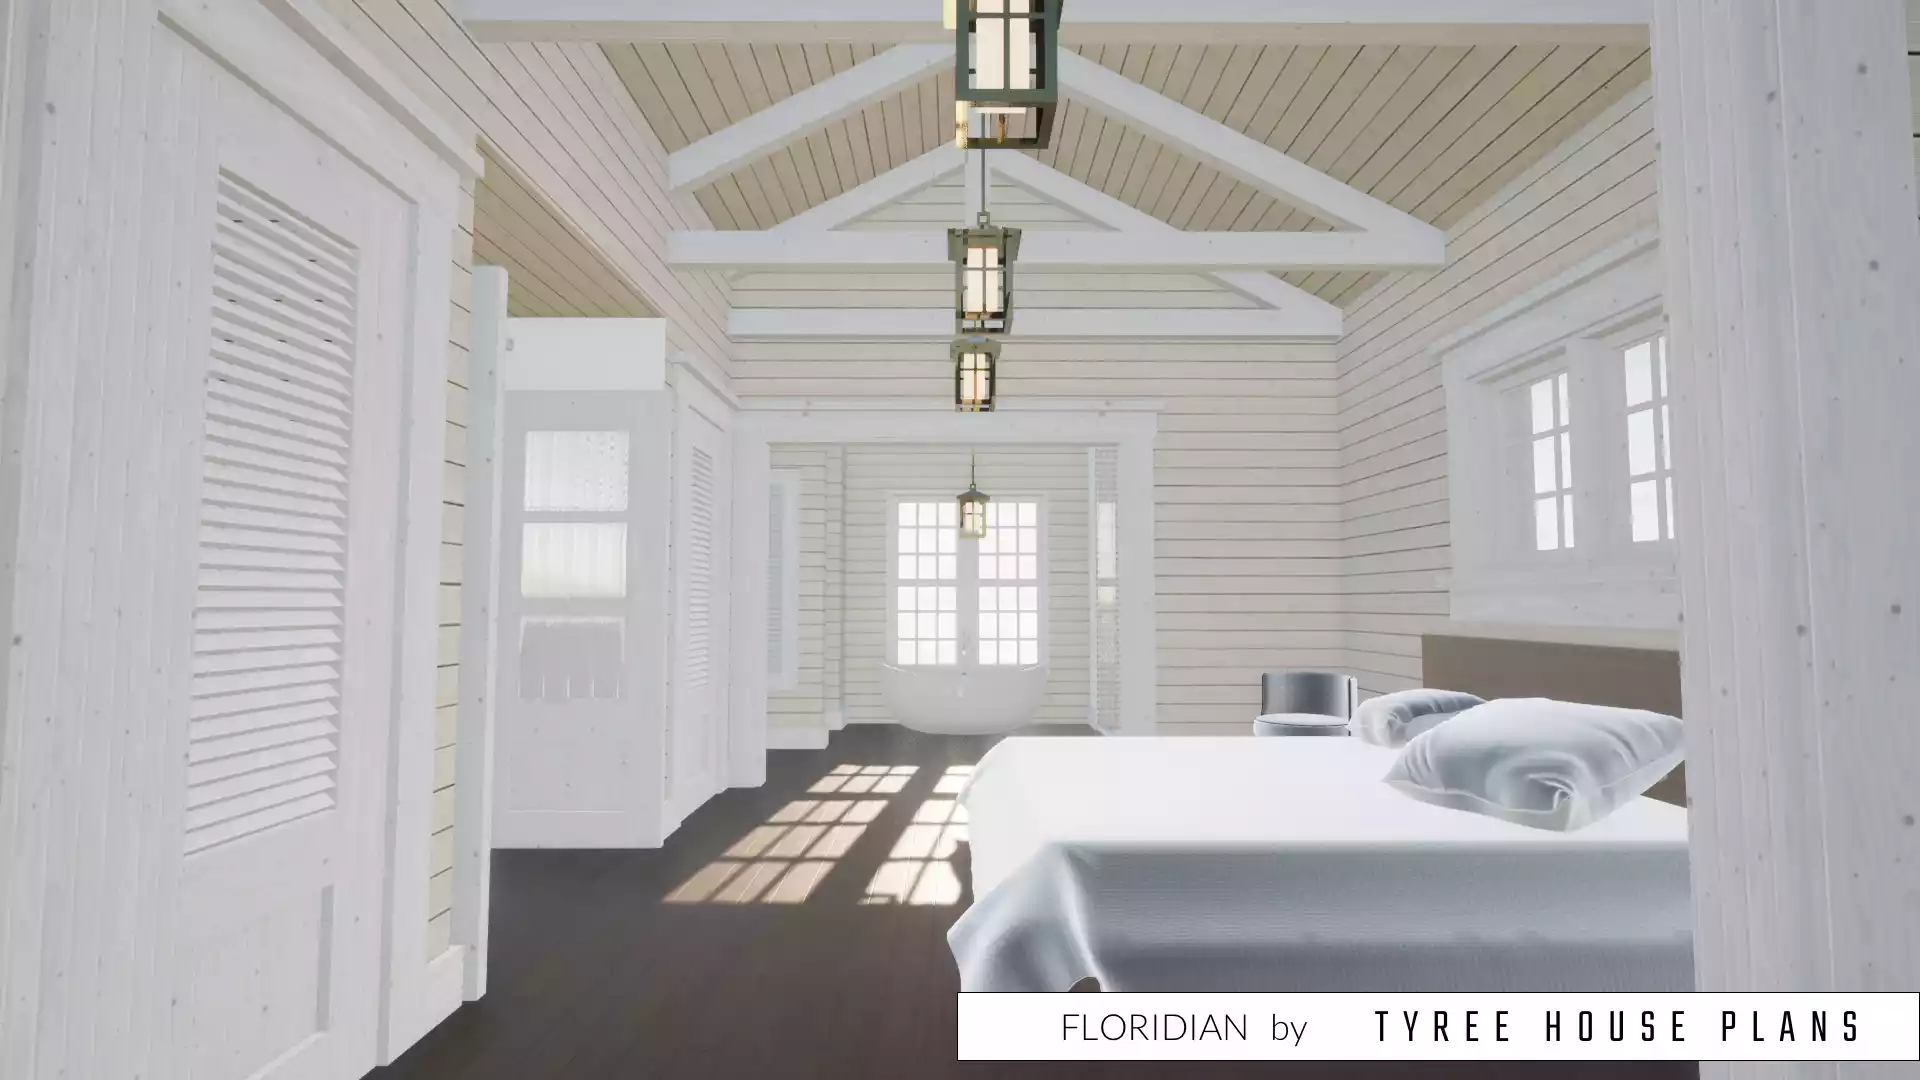 Romantic bedroom suite with vaulted ceiling. Floridian by Tyree House Plans.